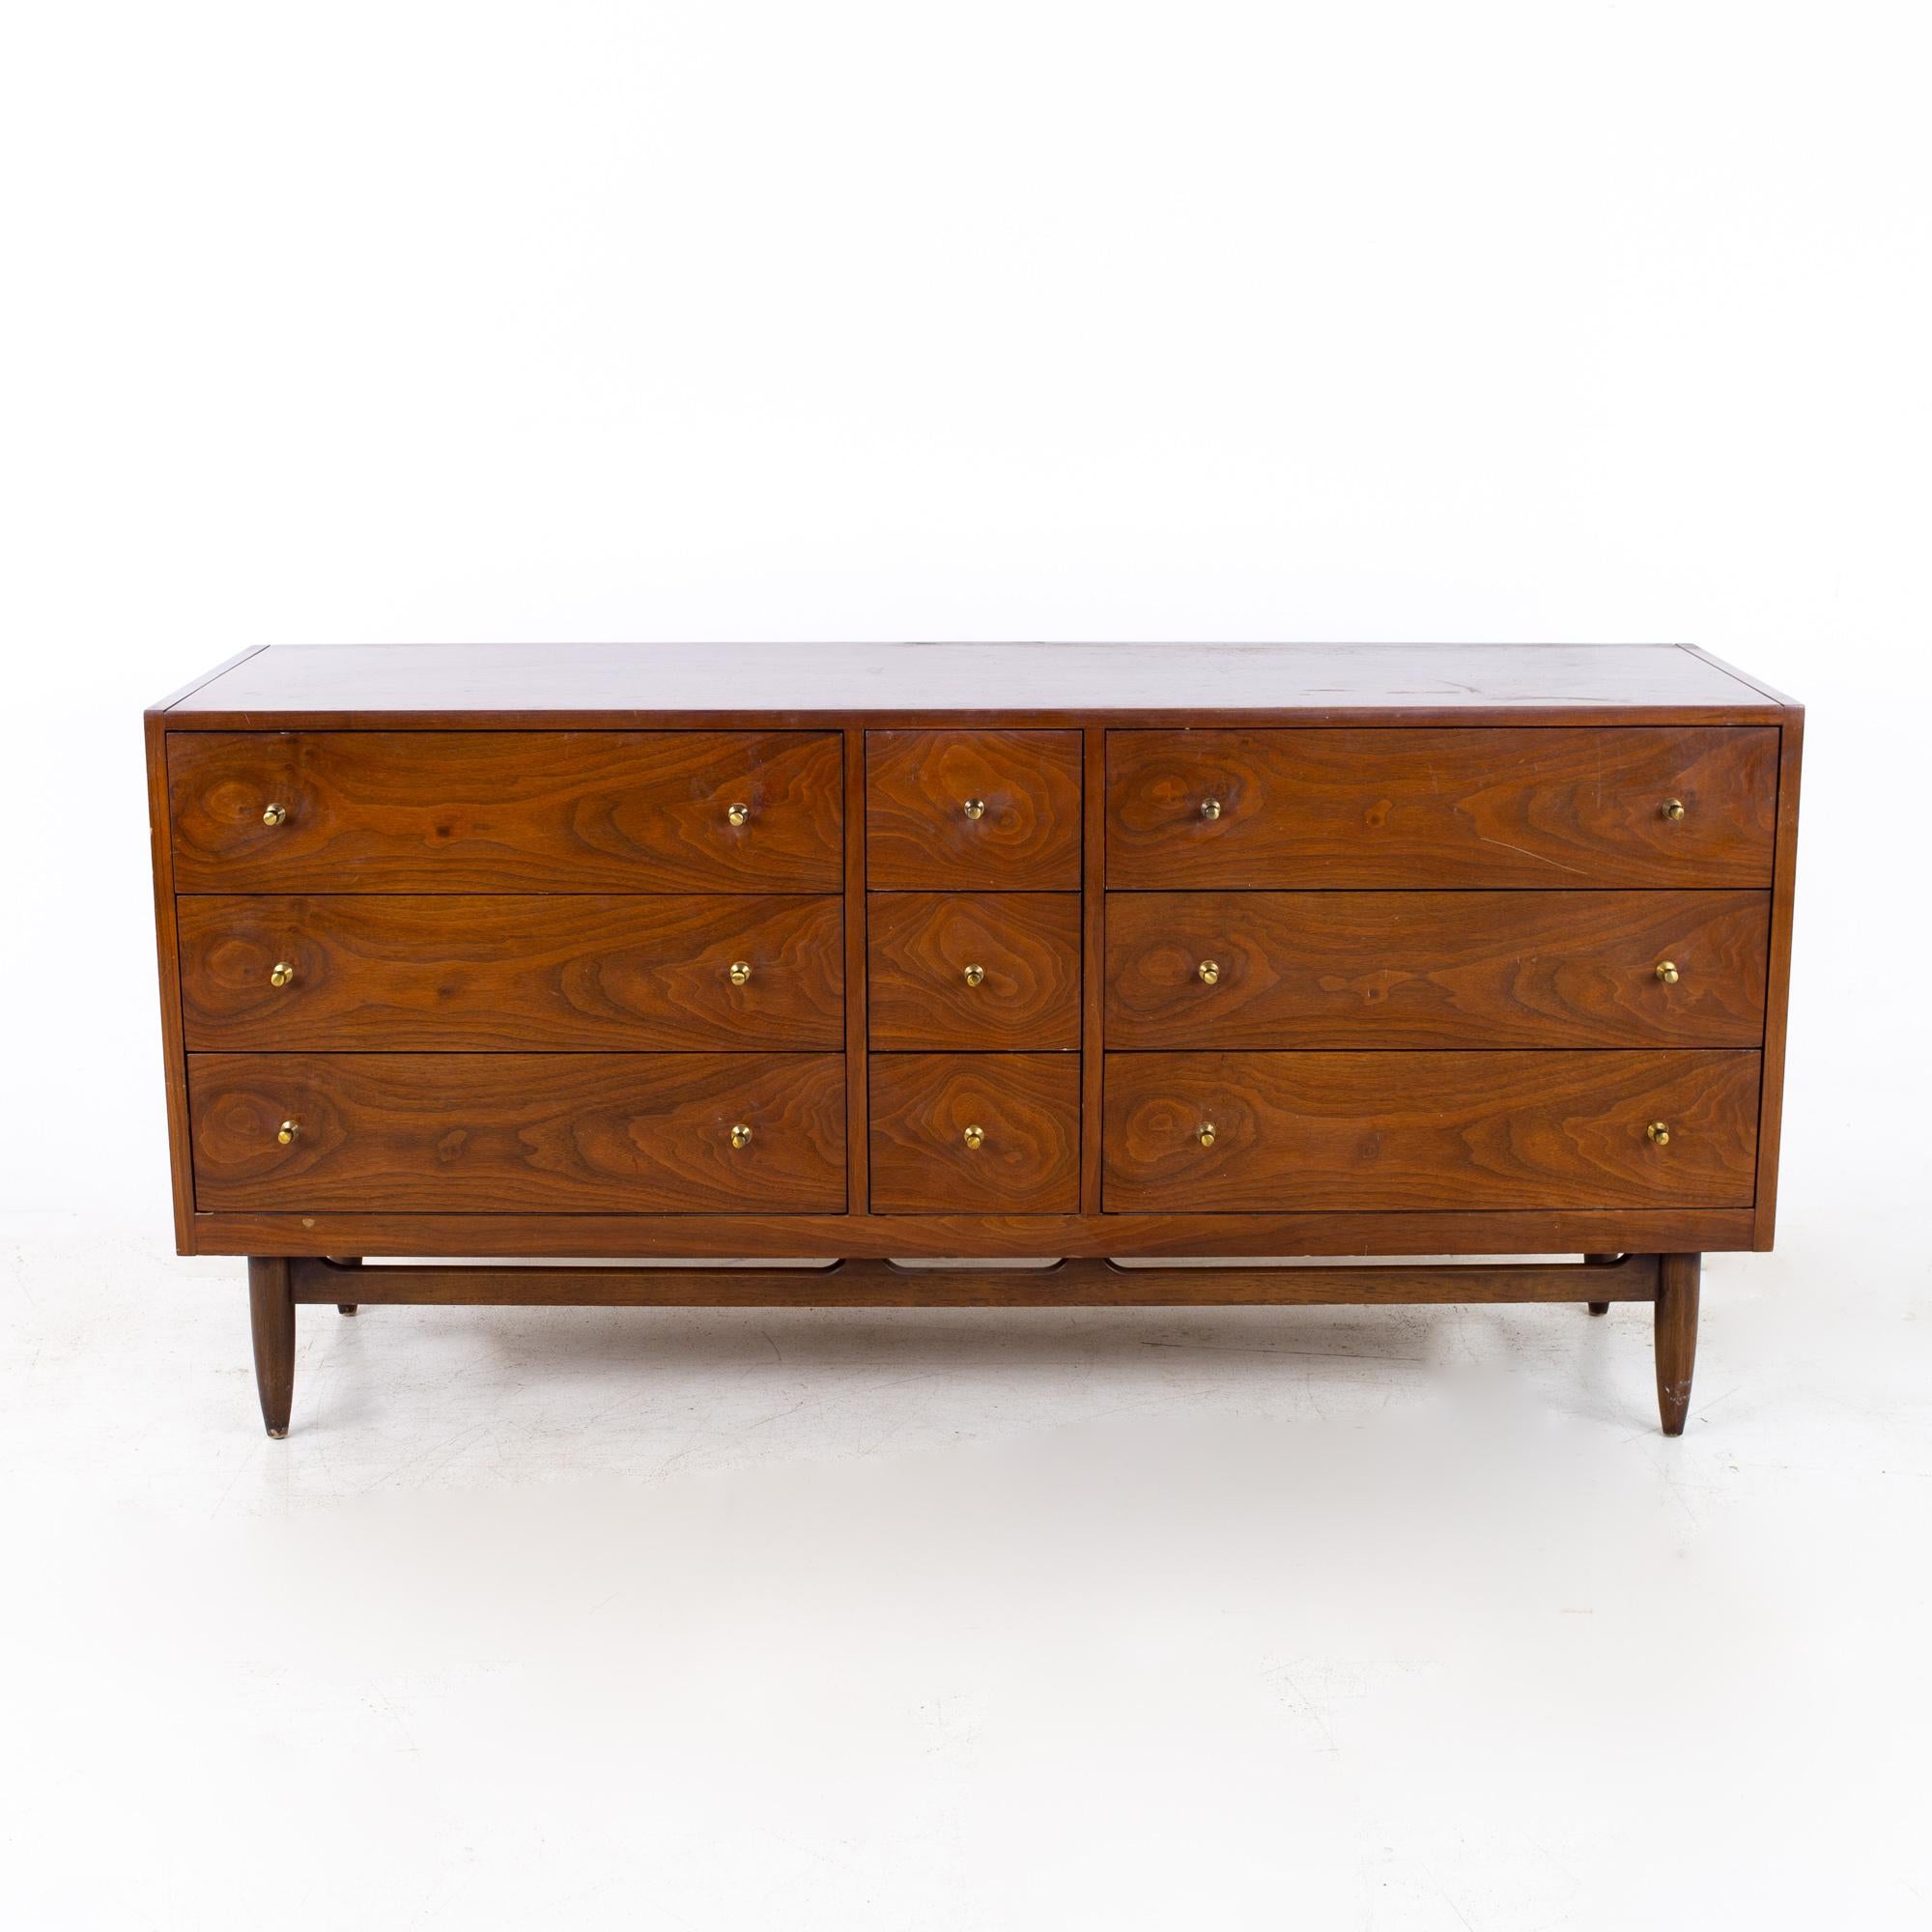 Mount Airy Mid Century Walnut and Brass 9 Drawer Lowboy Dresser

Dresser measures: 63 wide x 20 deep x 30 inches high

?All pieces of furniture can be had in what we call restored vintage condition. That means the piece is restored upon purchase so